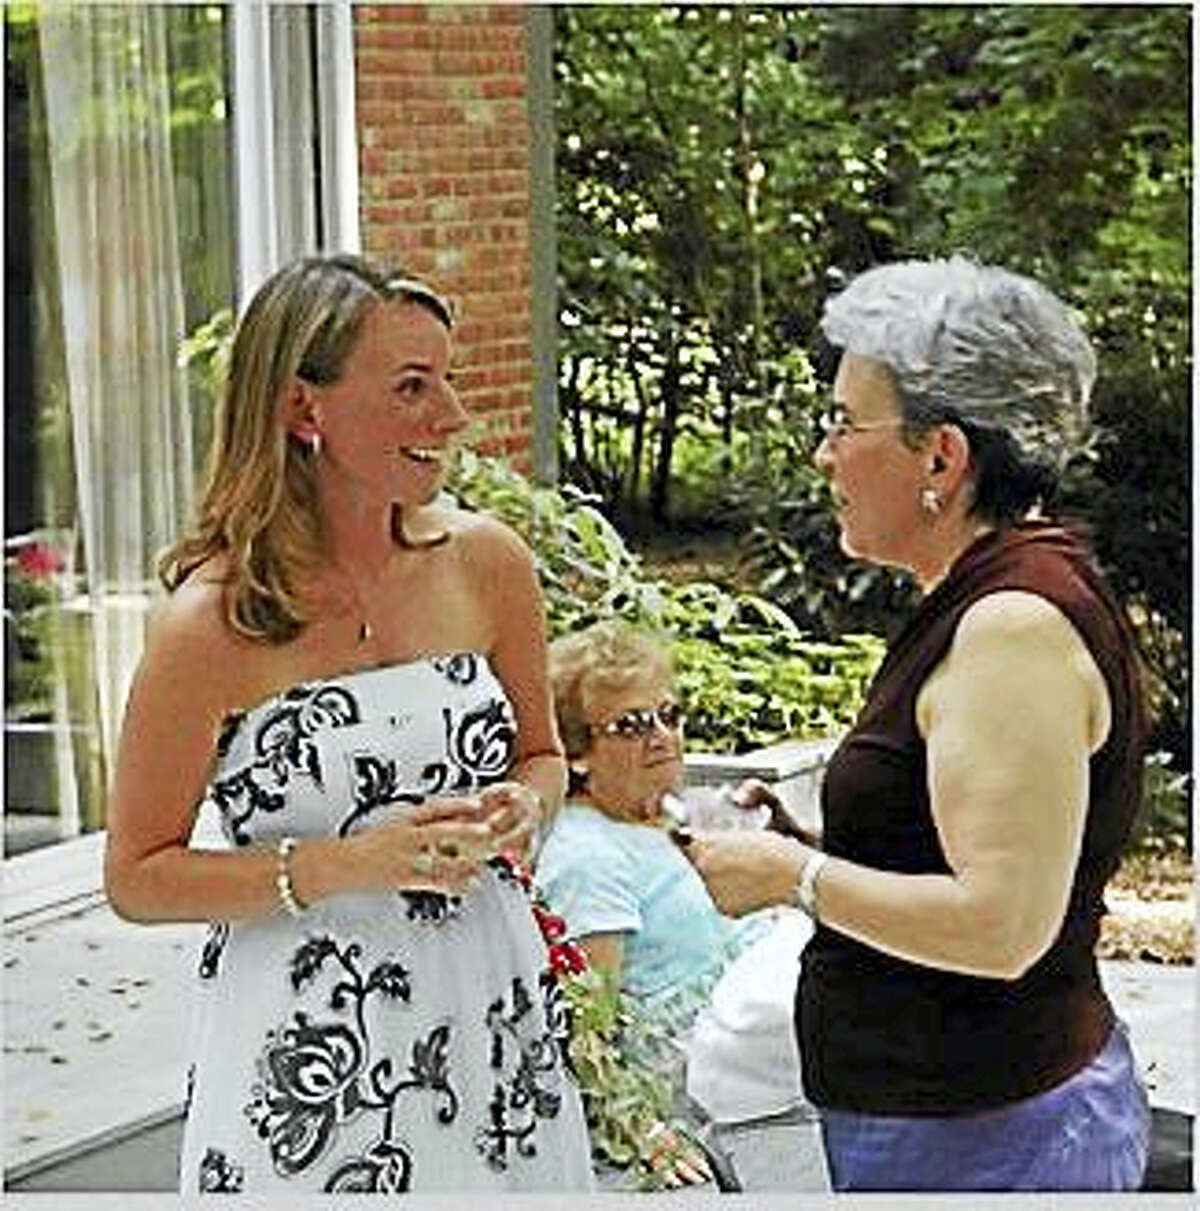 Contributed photo At right is Fran Greb, Lindsay Romano’s beloved aunt. A professor of education at Montclair University and “force of nature,” she succumbed to brain cancer in 2015 a year after being diagnosed.